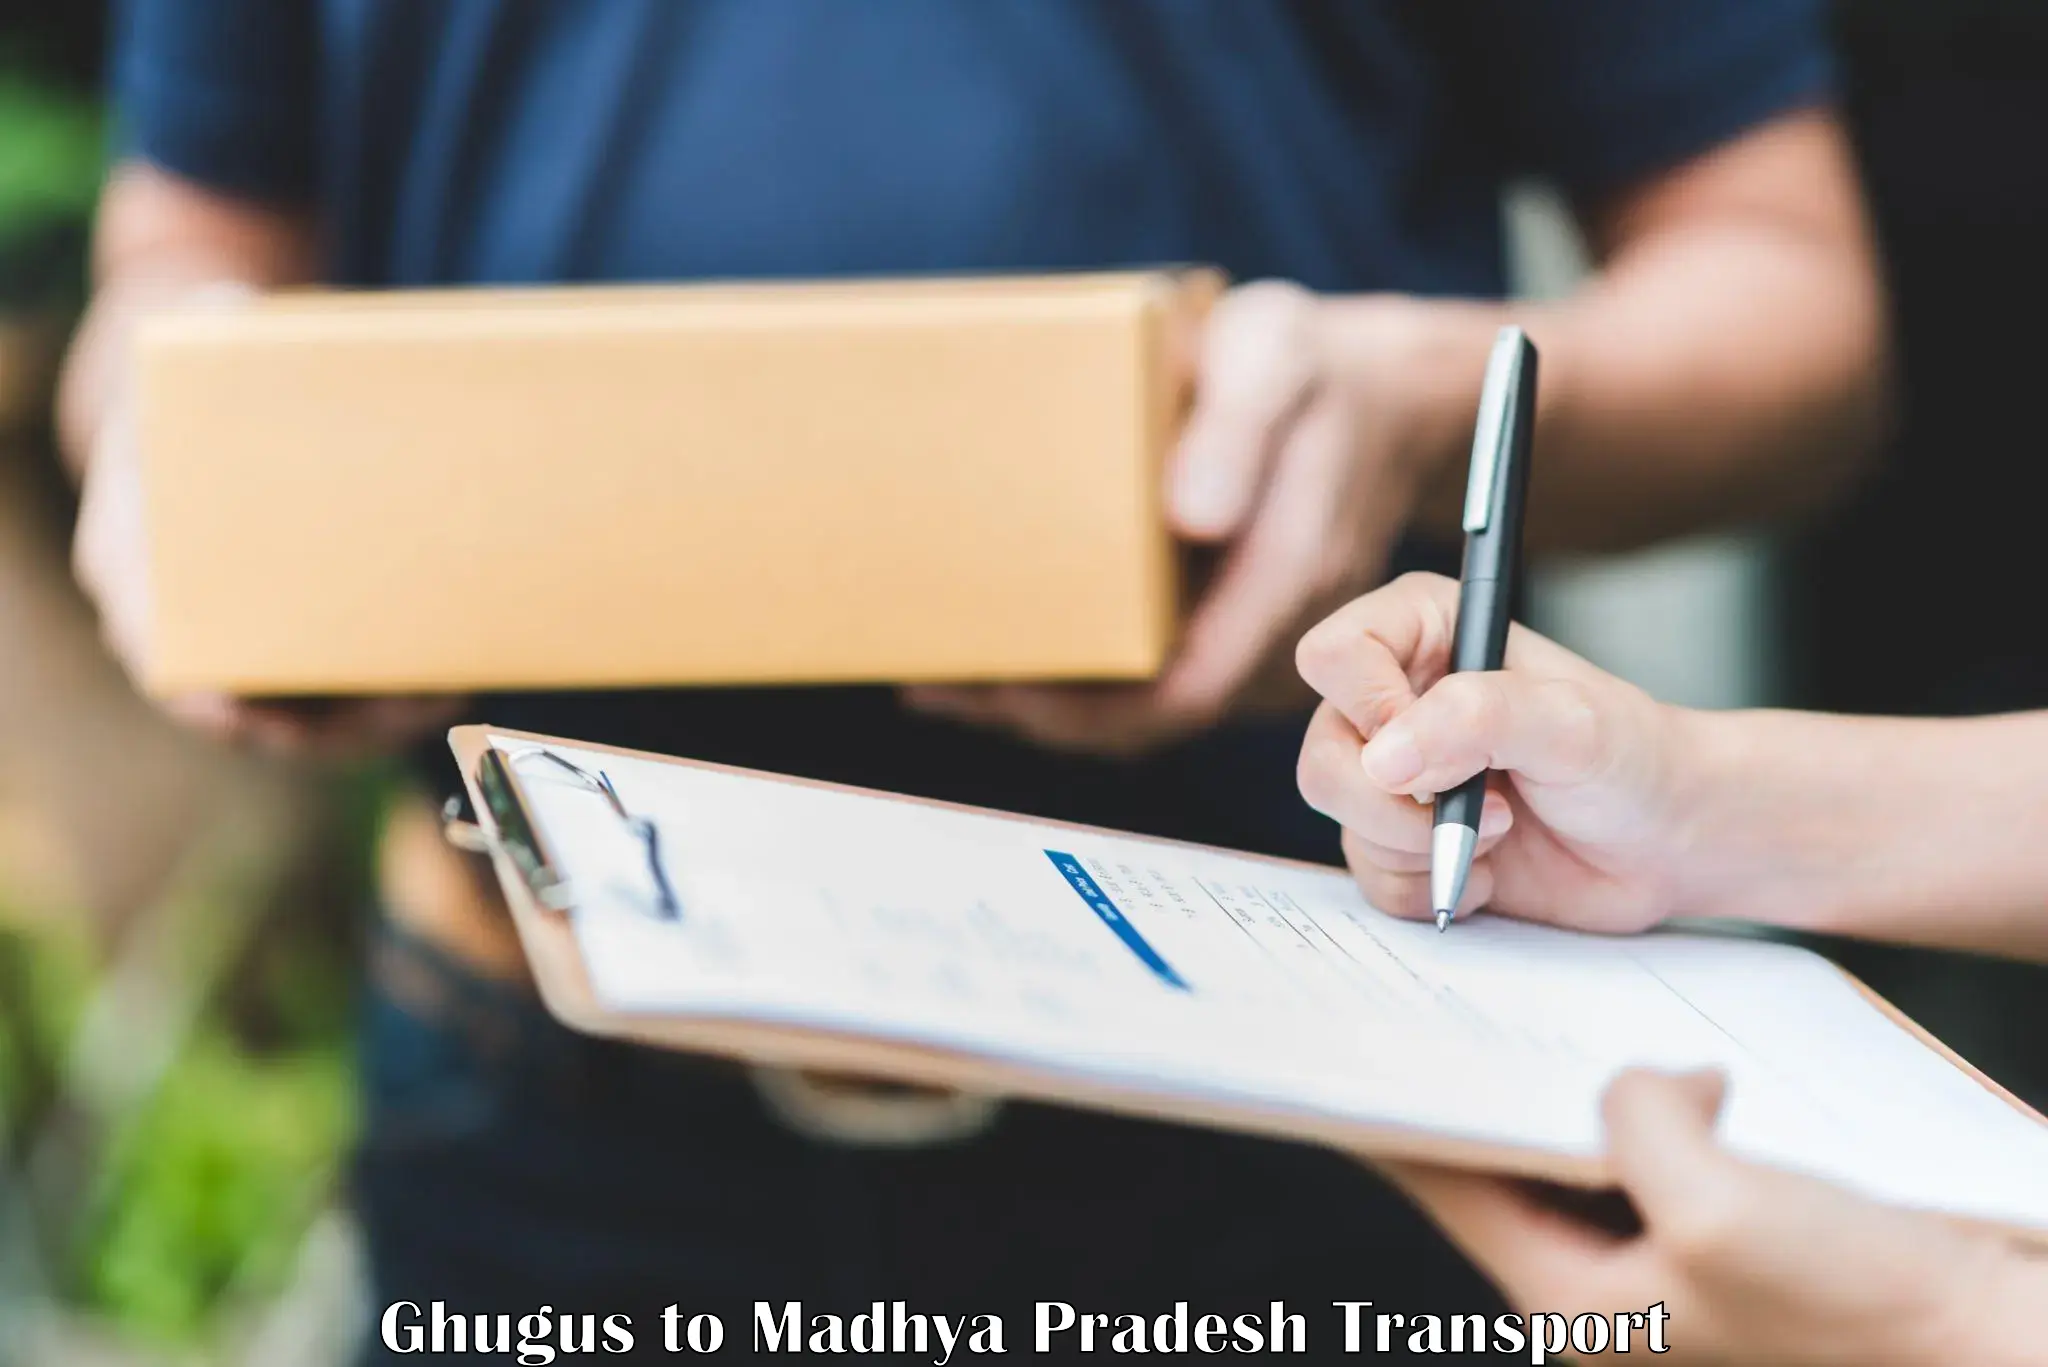 Domestic goods transportation services Ghugus to Chanderi